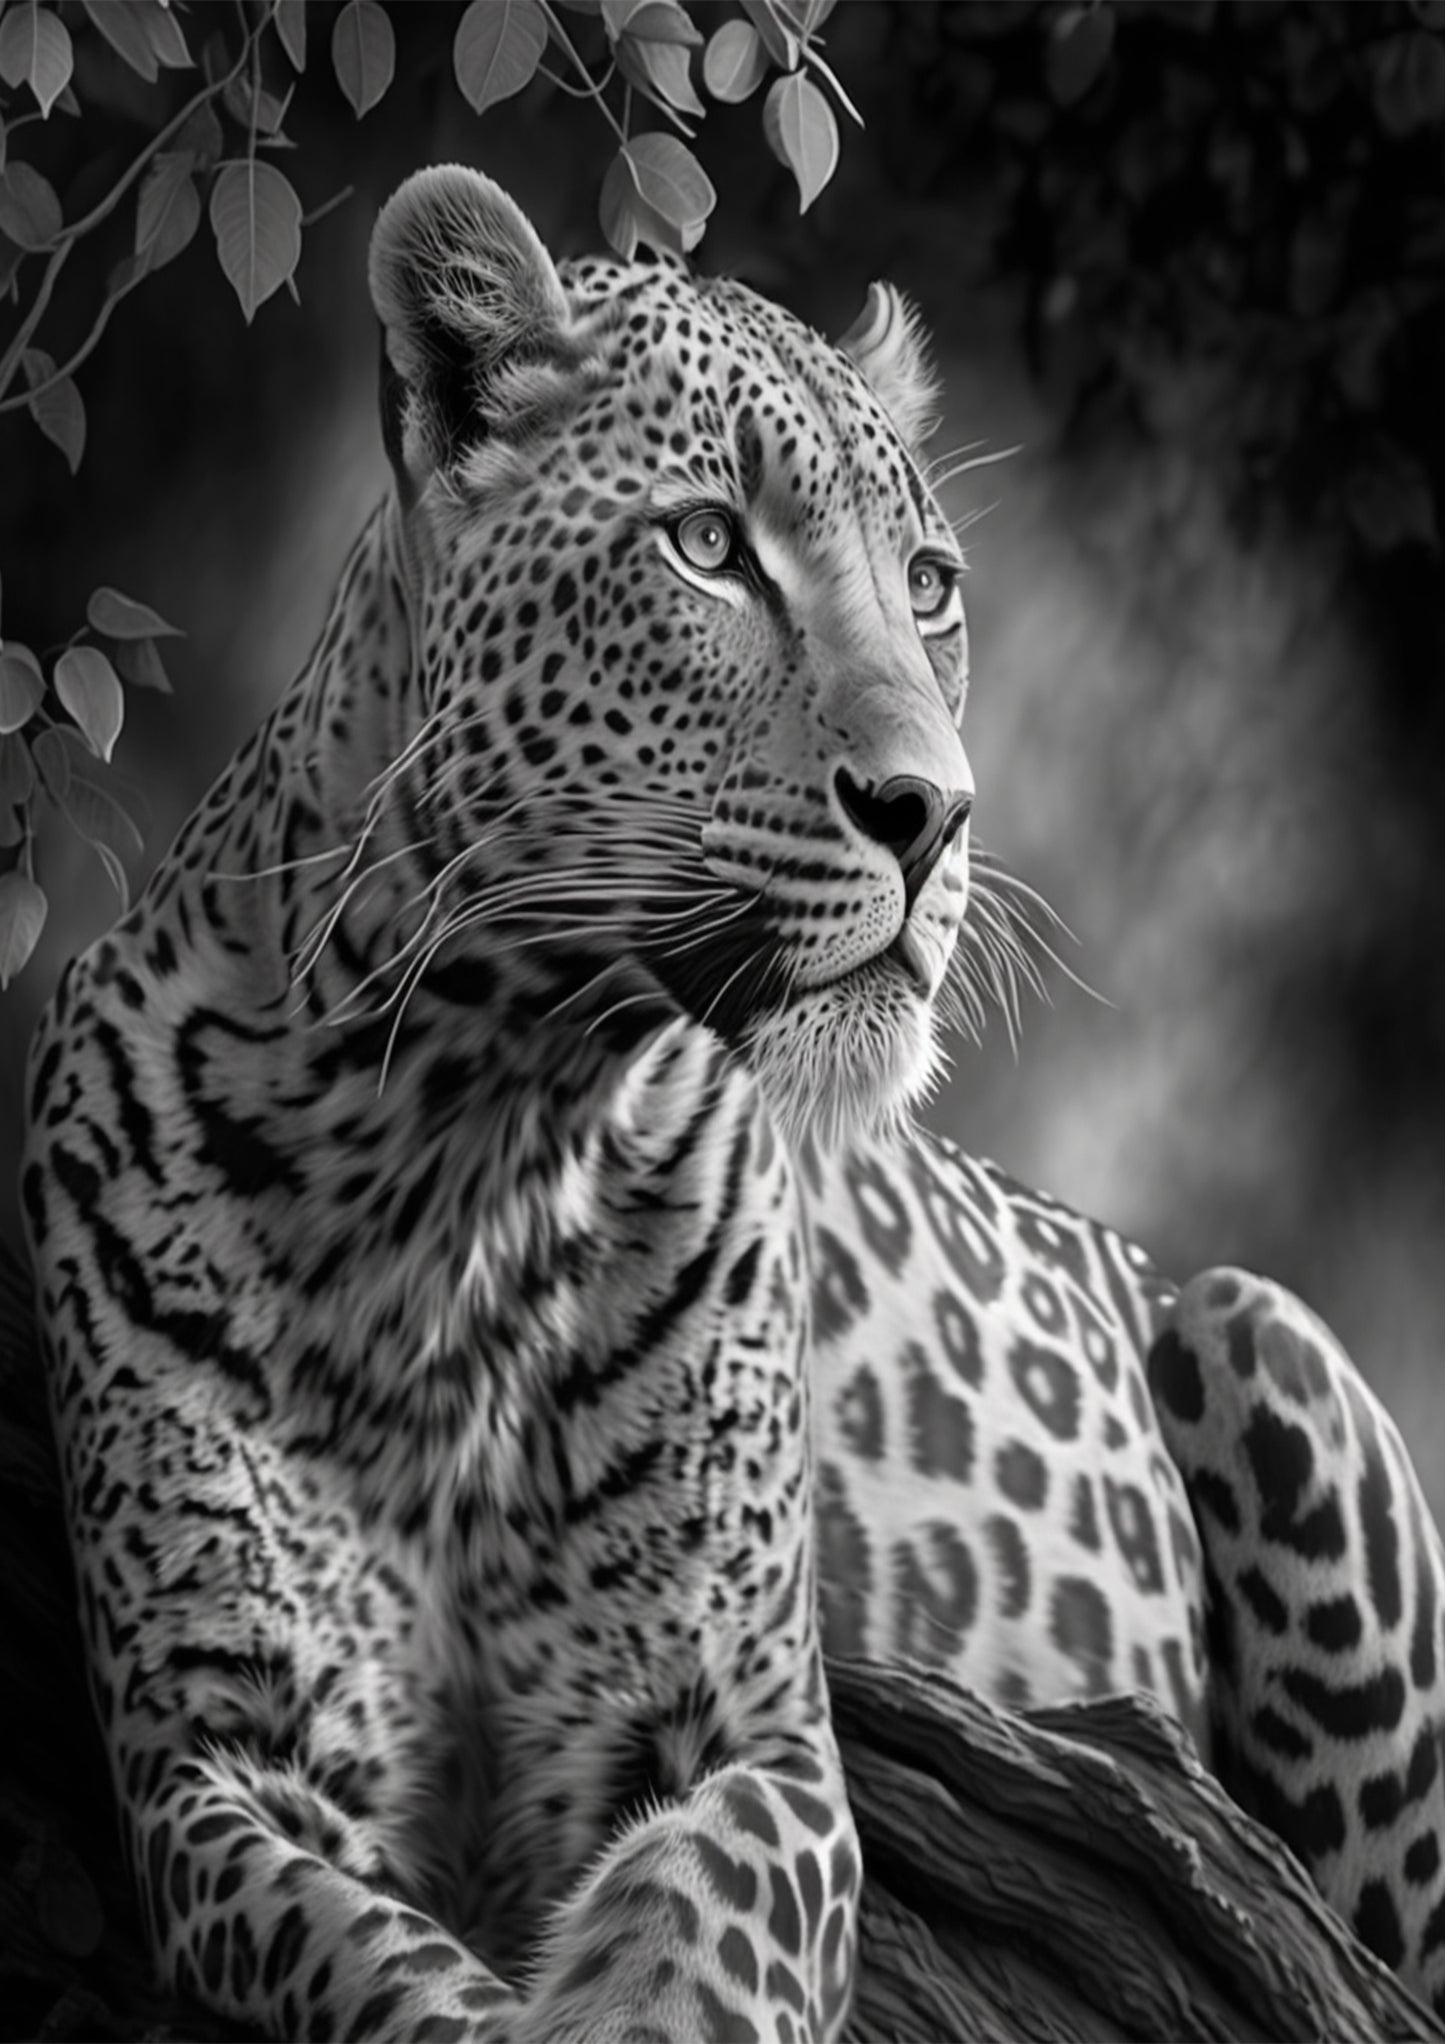 The monochrome wild animal’s collection - the Leopard